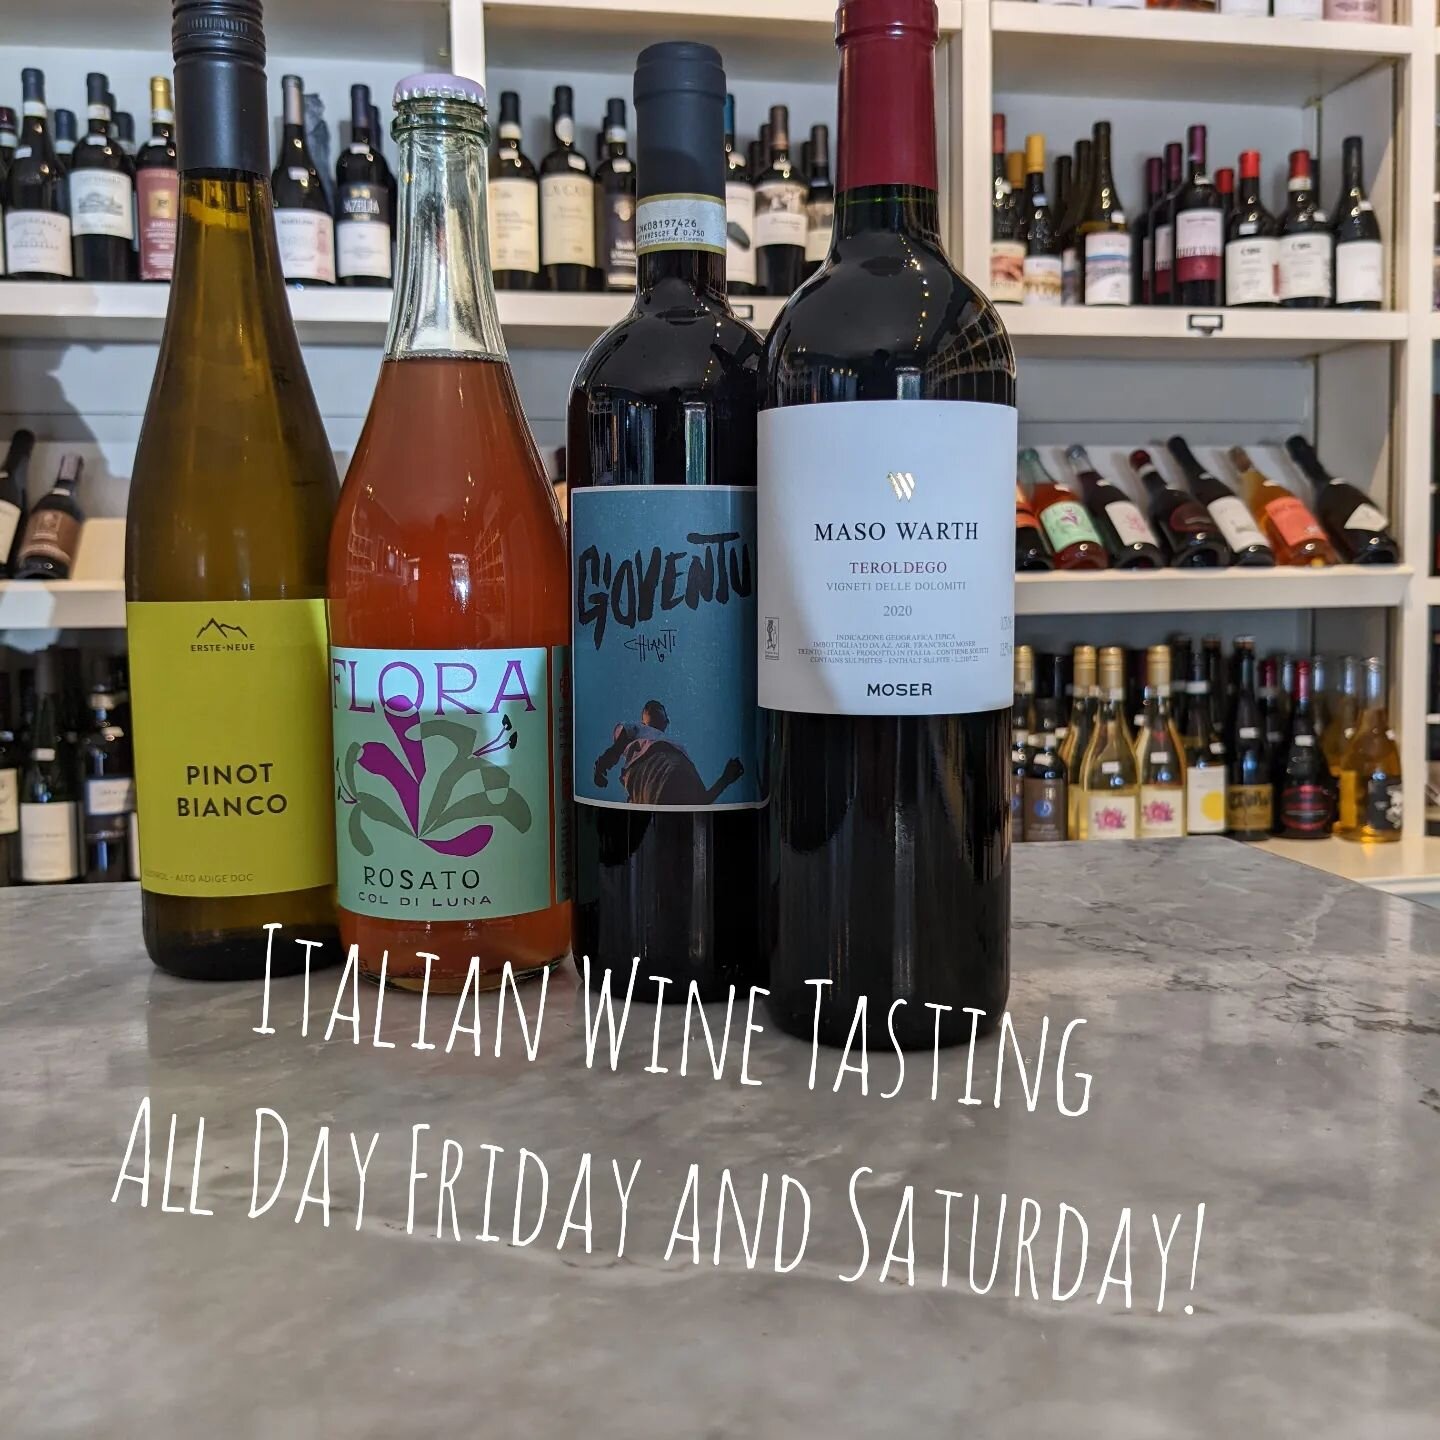 The lineup for this weekend is fantastic! We have a little something for everyone in this mix. We welcome back a killer Pinot Blanc and for the first time we are cracking open a bottle of Moser quickly becoming a go-to Italian red. Don't miss out. 
S